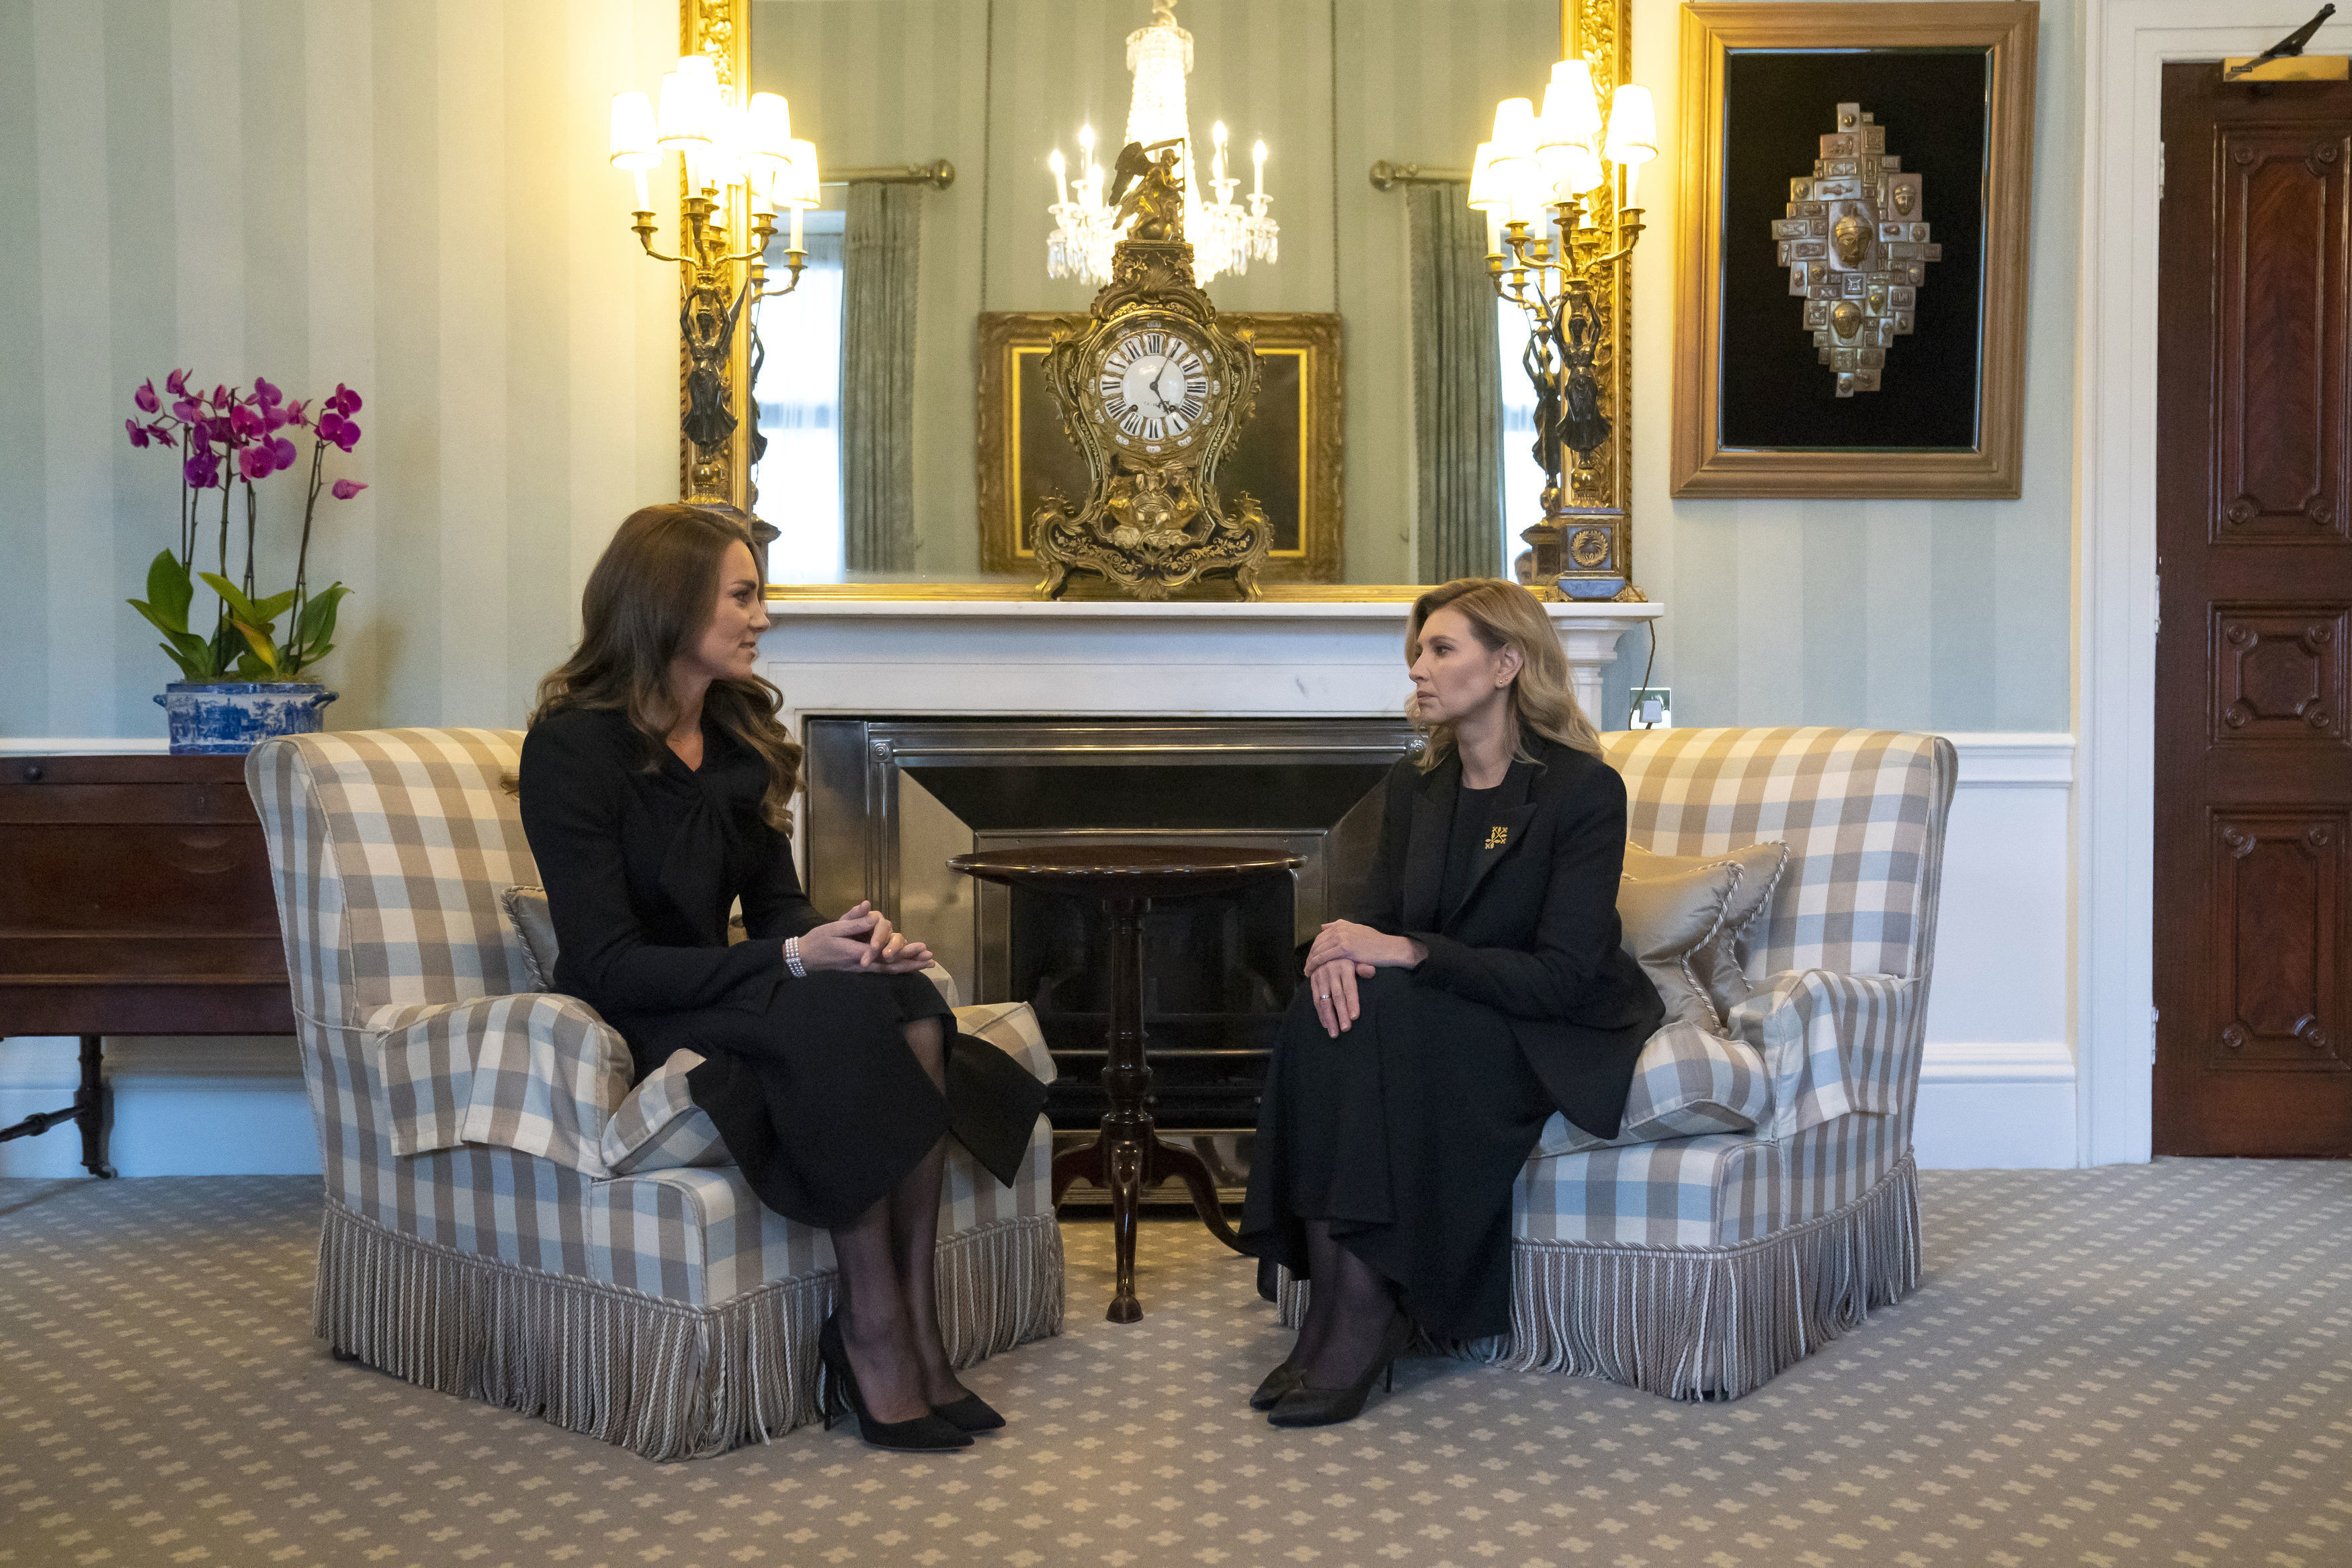 <p>Britain's Princess Kate spoke with Olena Zelenska, the first lady of Ukraine, as she welcomed her to Buckingham Palace in London on Sept. 18, 2022, one day before the funeral of Queen Elizabeth II.</p>